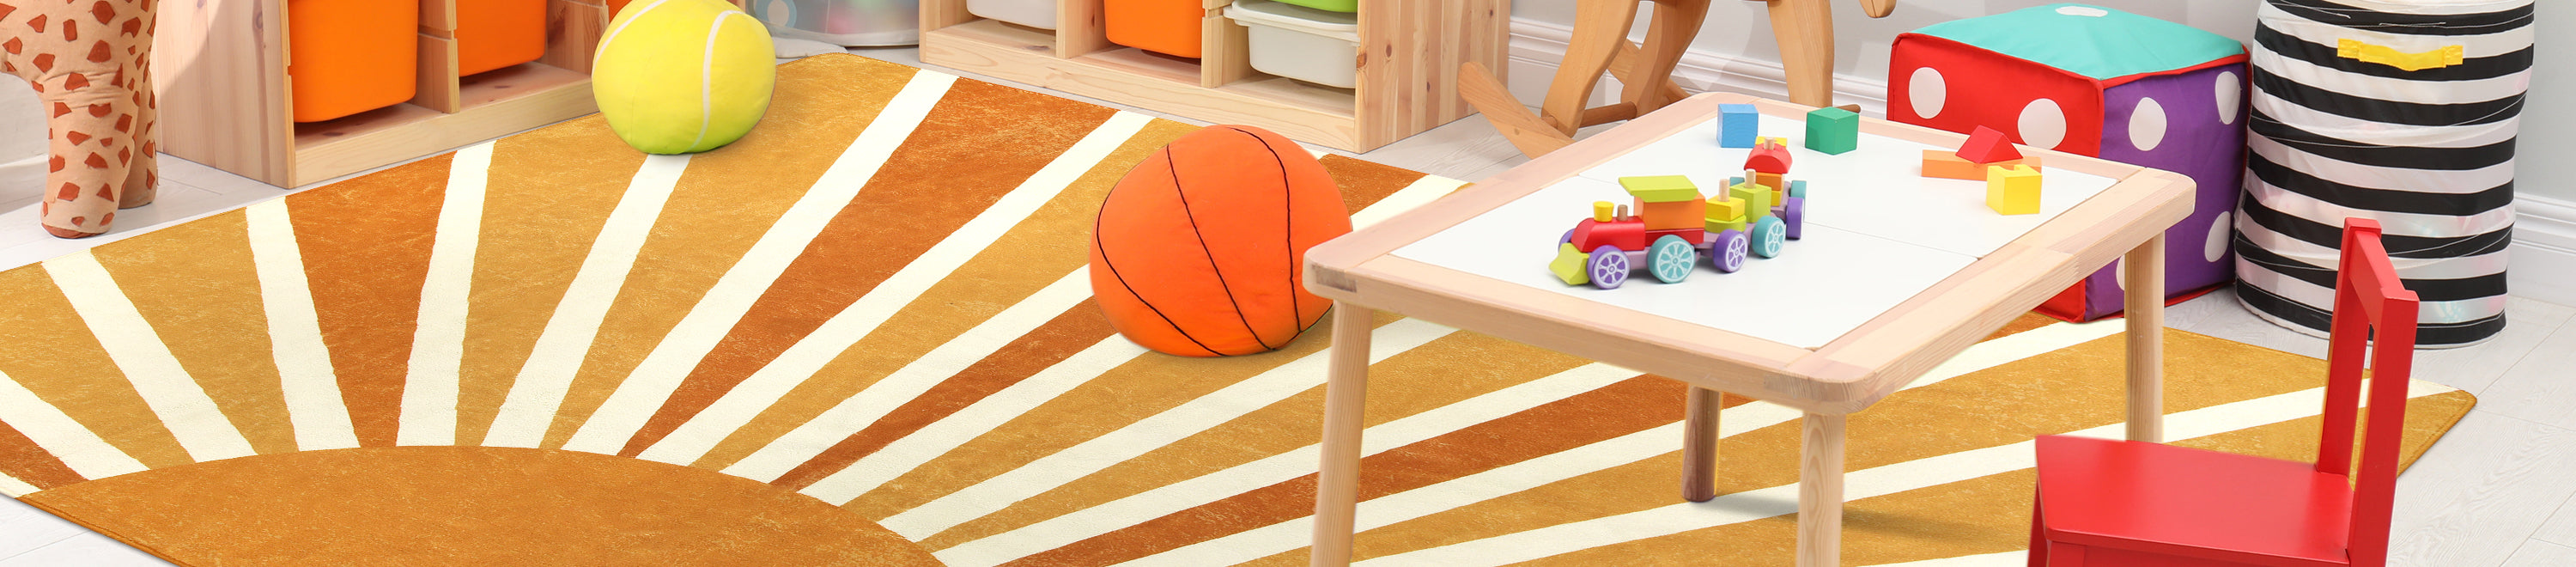 Adding Washable Kids Rugs into Your Nursery or Kids' Room Decor